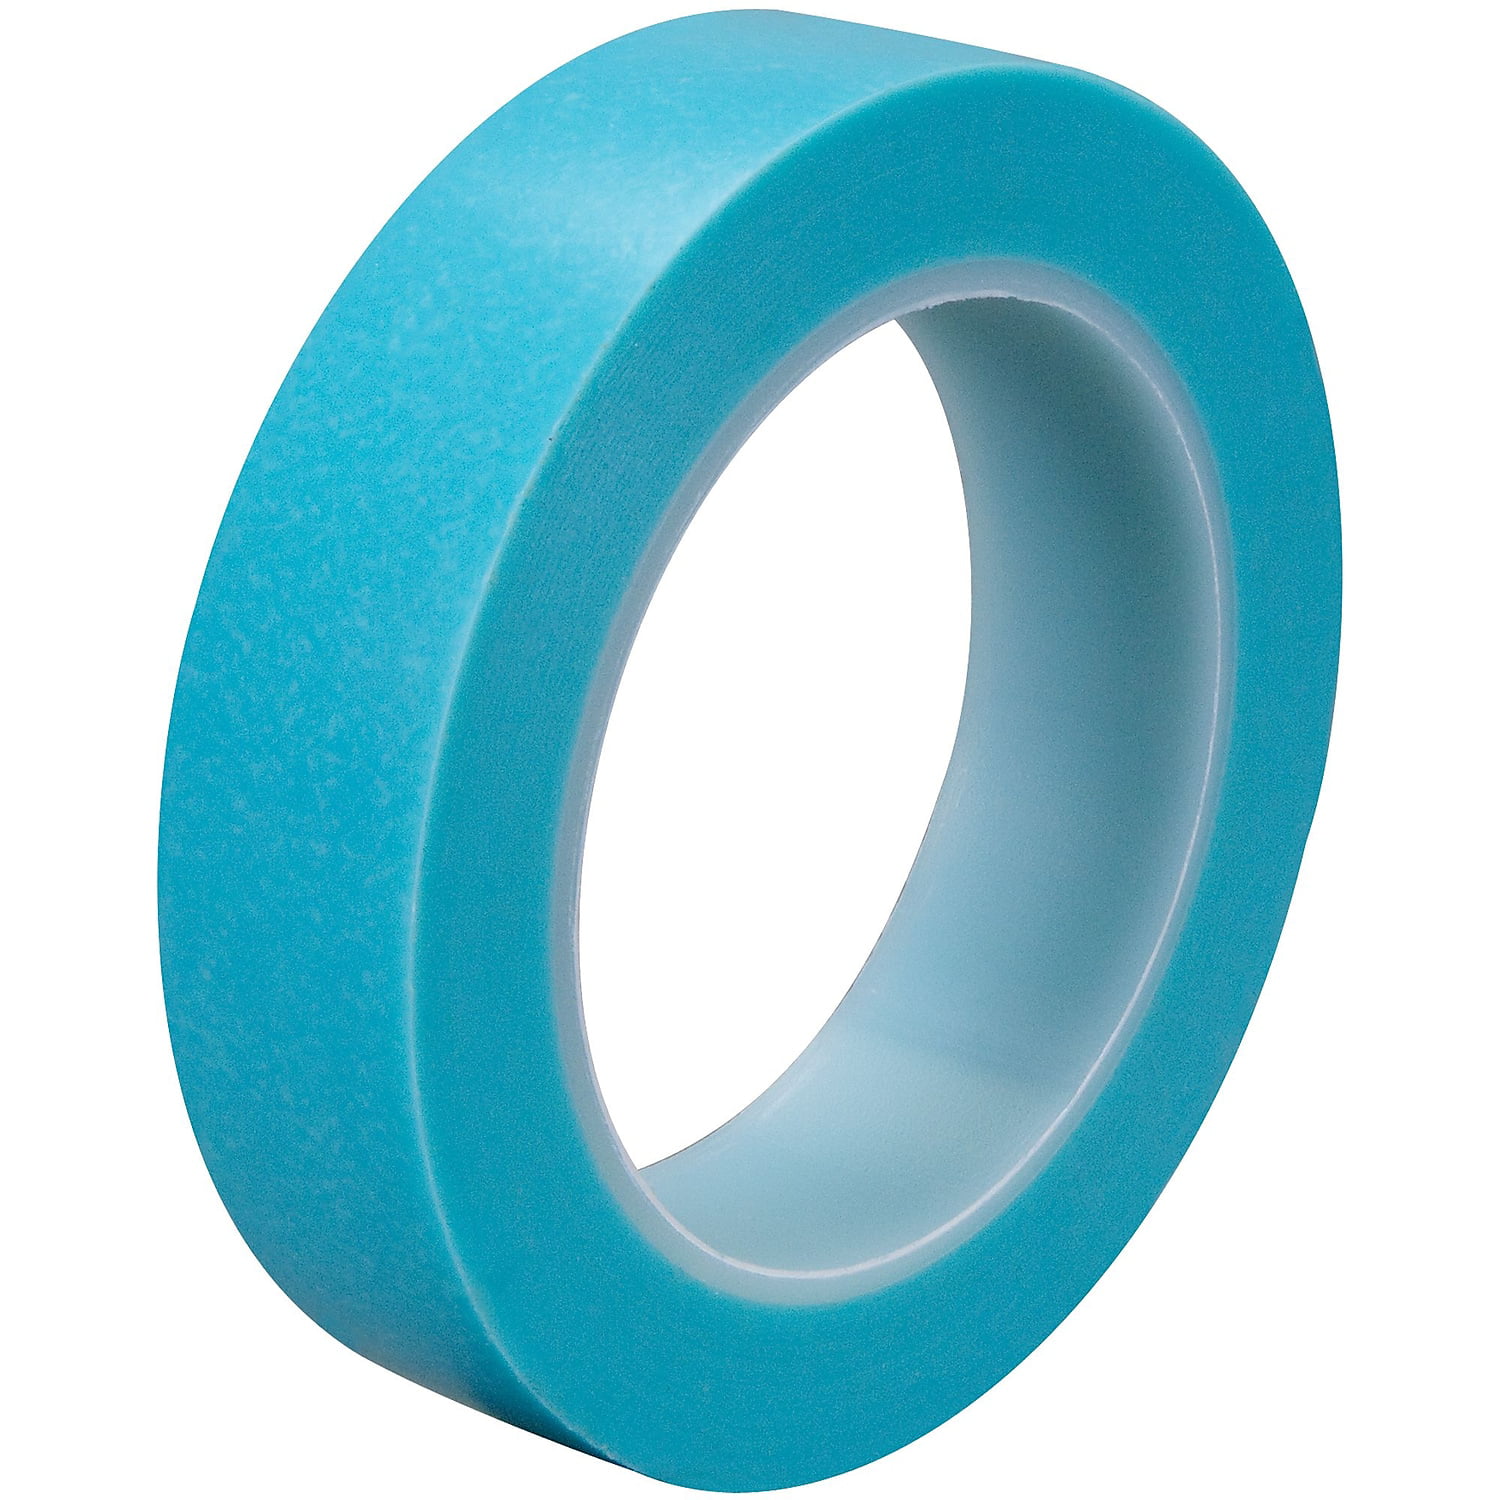 Scotch T9354737t3pk 1 In. X 36 Yards 4737t Masking Tape, Blue - Pack Of 3